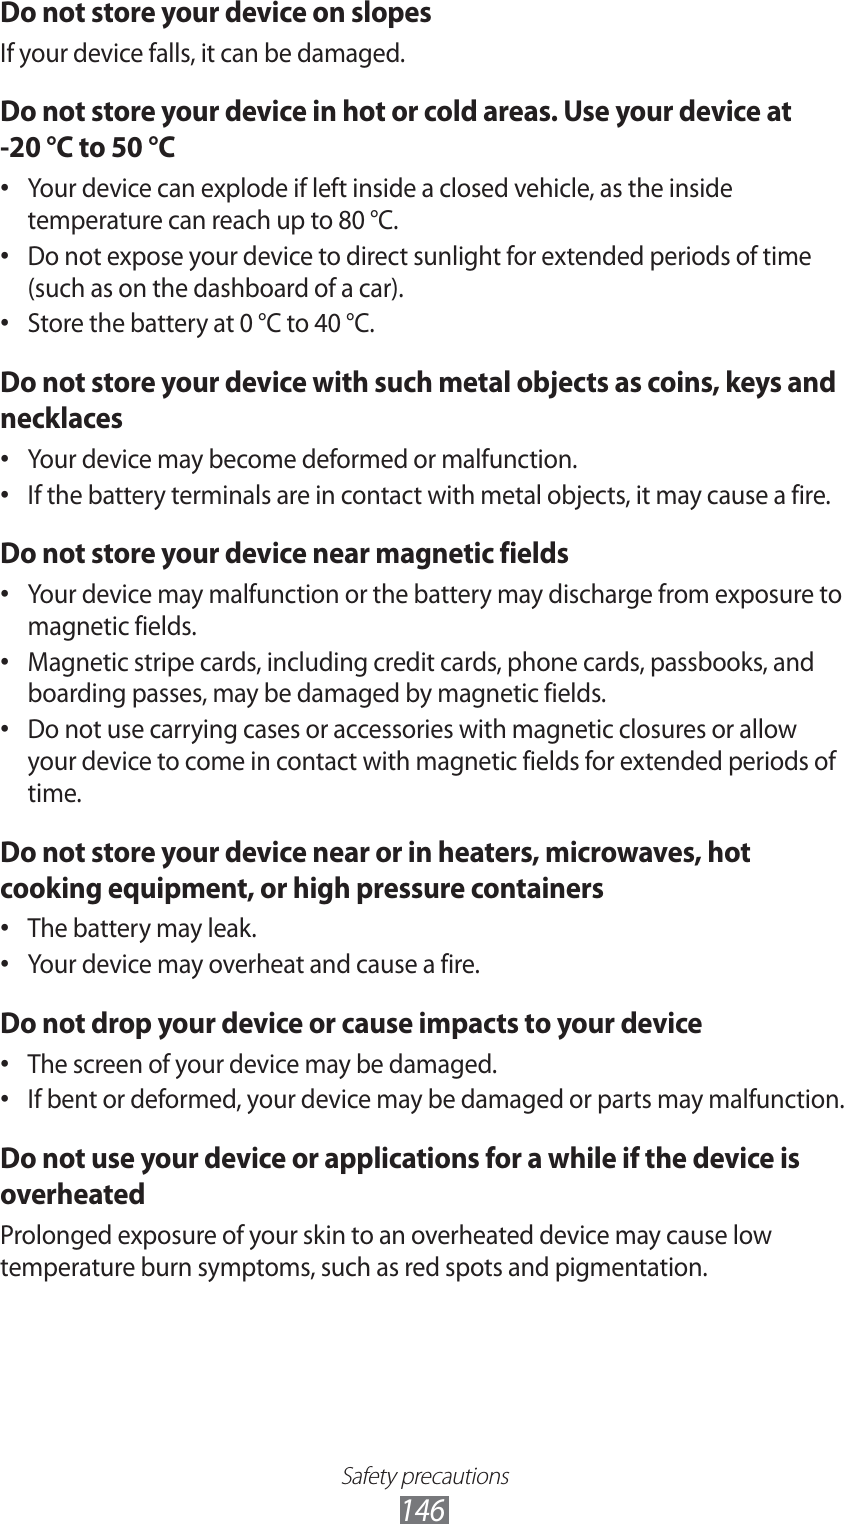 Safety precautions146Do not store your device on slopesIf your device falls, it can be damaged.Do not store your device in hot or cold areas. Use your device at -20 °C to 50 °CYour device can explode if left inside a closed vehicle, as the inside • temperature can reach up to 80 °C.Do not expose your device to direct sunlight for extended periods of time • (such as on the dashboard of a car).Store the battery at 0 °C to 40 °C.• Do not store your device with such metal objects as coins, keys and necklacesYour device may become deformed or malfunction.• If the battery terminals are in contact with metal objects, it may cause a fire.• Do not store your device near magnetic fieldsYour device may malfunction or the battery may discharge from exposure to • magnetic fields.Magnetic stripe cards, including credit cards, phone cards, passbooks, and • boarding passes, may be damaged by magnetic fields.Do not use carrying cases or accessories with magnetic closures or allow • your device to come in contact with magnetic fields for extended periods of time.Do not store your device near or in heaters, microwaves, hot cooking equipment, or high pressure containersThe battery may leak.• Your device may overheat and cause a fire.• Do not drop your device or cause impacts to your deviceThe screen of your device may be damaged.• If bent or deformed, your device may be damaged or parts may malfunction.• Do not use your device or applications for a while if the device is overheatedProlonged exposure of your skin to an overheated device may cause low temperature burn symptoms, such as red spots and pigmentation.